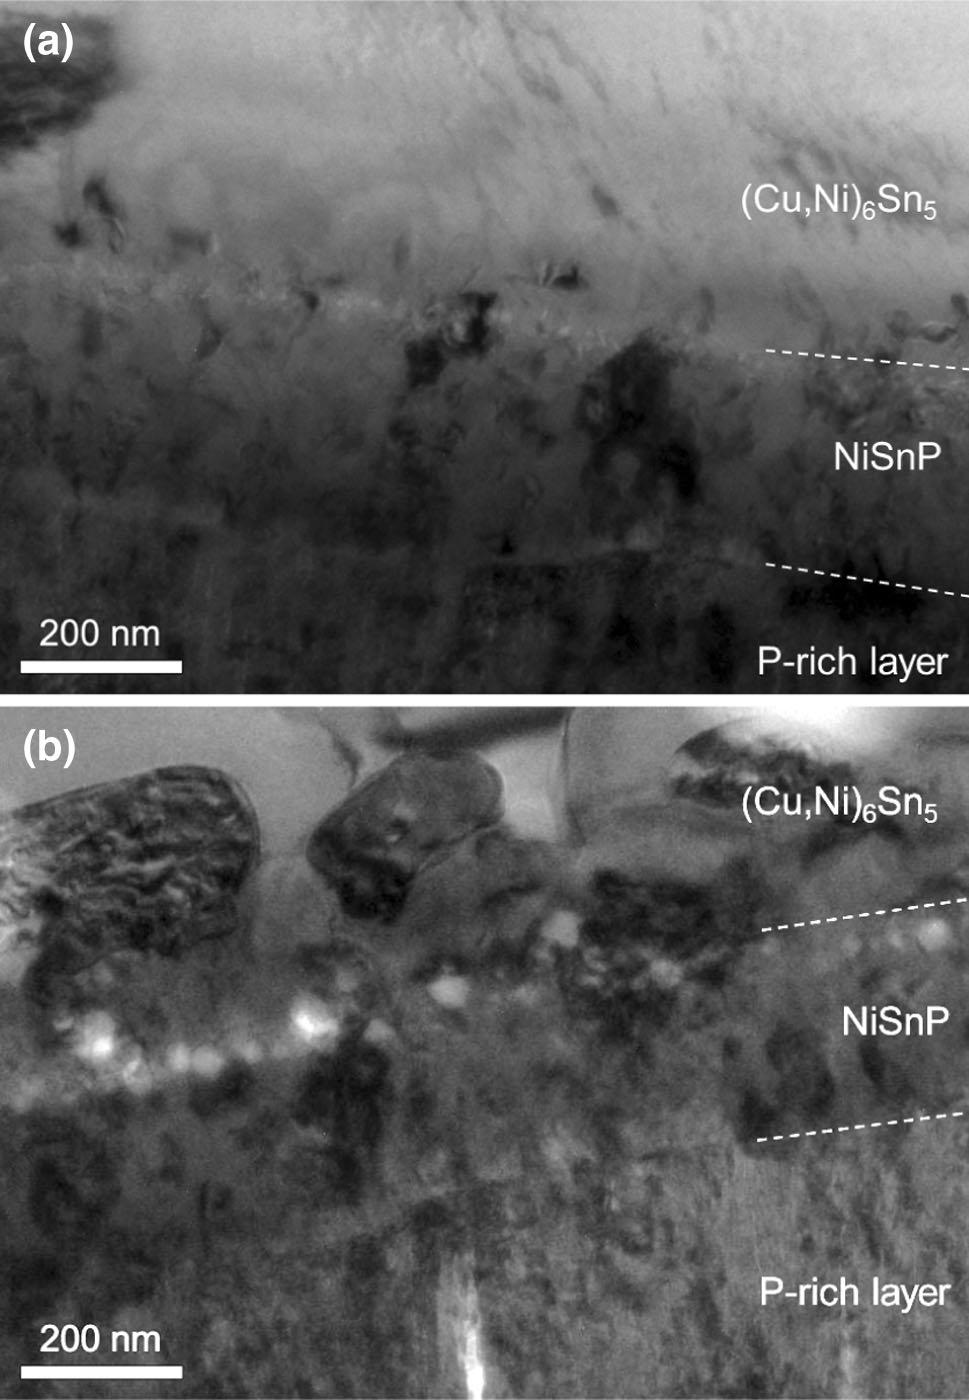 In summary, fracture of the 0 MTO sample occurred in (Cu,Ni) 6 Sn 5 and Ni-Sn-P and fracture of the 3 MTO sample occurred in the P-rich layer as well as in the (Cu,Ni) 6 Sn 5 and the Ni-Sn-P layer.